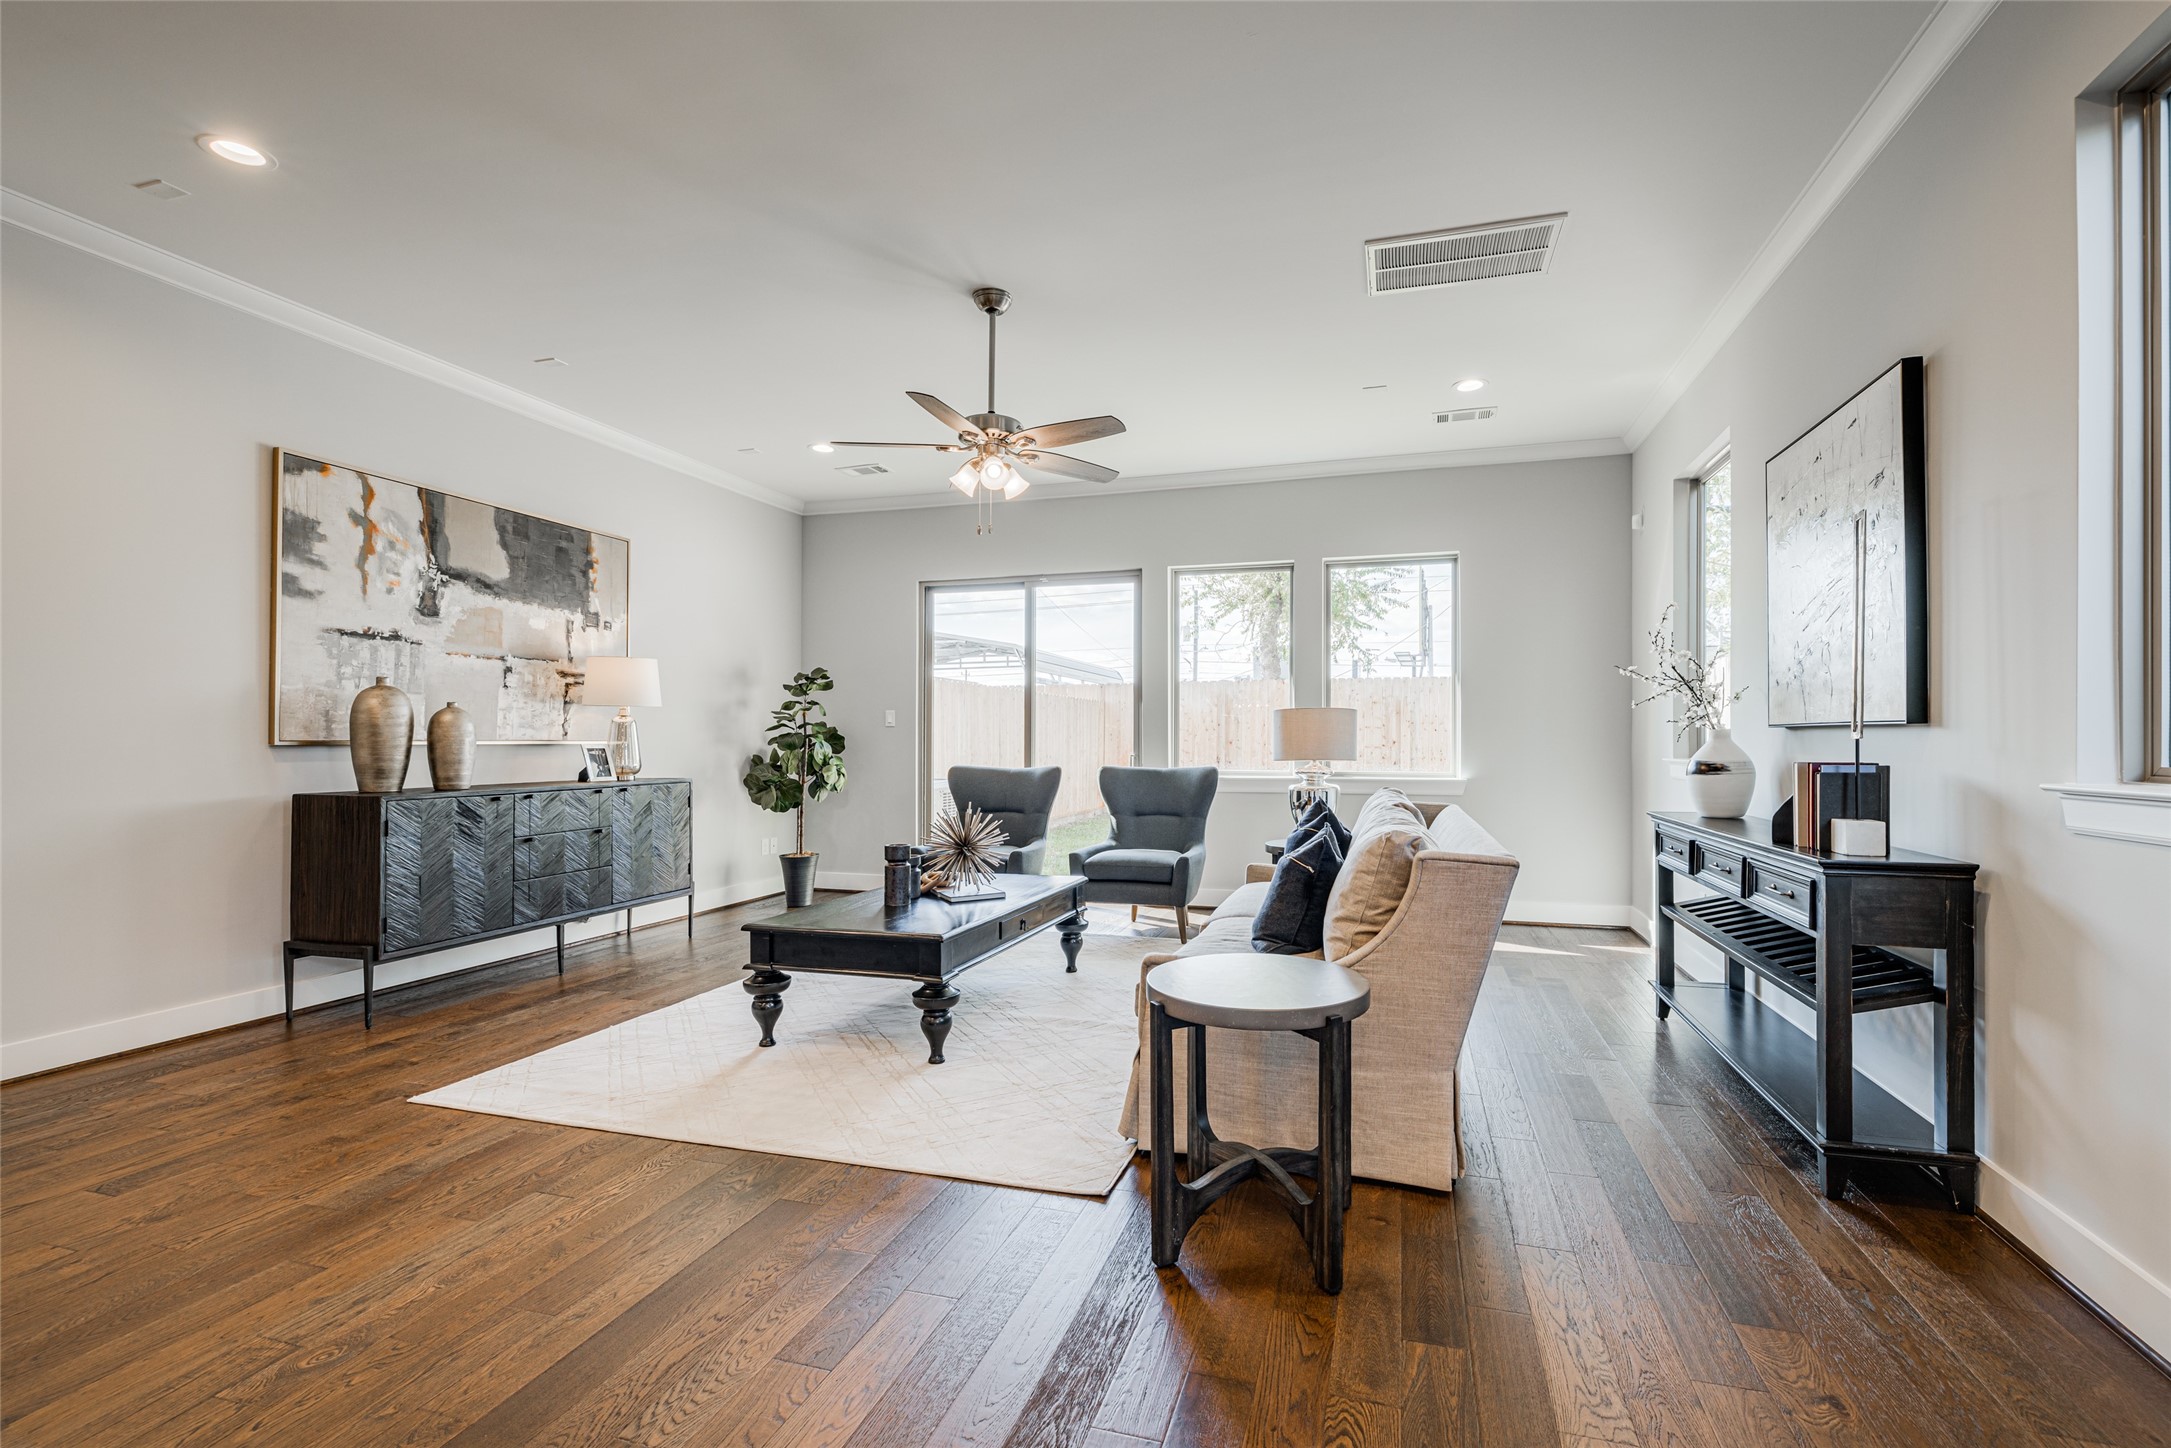 ASK ABOUT CUSTOMIZATION OPTIONS DURING CONSTRUCTION ONLY * MAZZTAO MODEL HOME * PHOTOS MAY SHOW A SIMILAR FLOOR PLAN AND/OR UPGRADED/ALTERNATIVE FINISHES * Please use these photos as a guide *